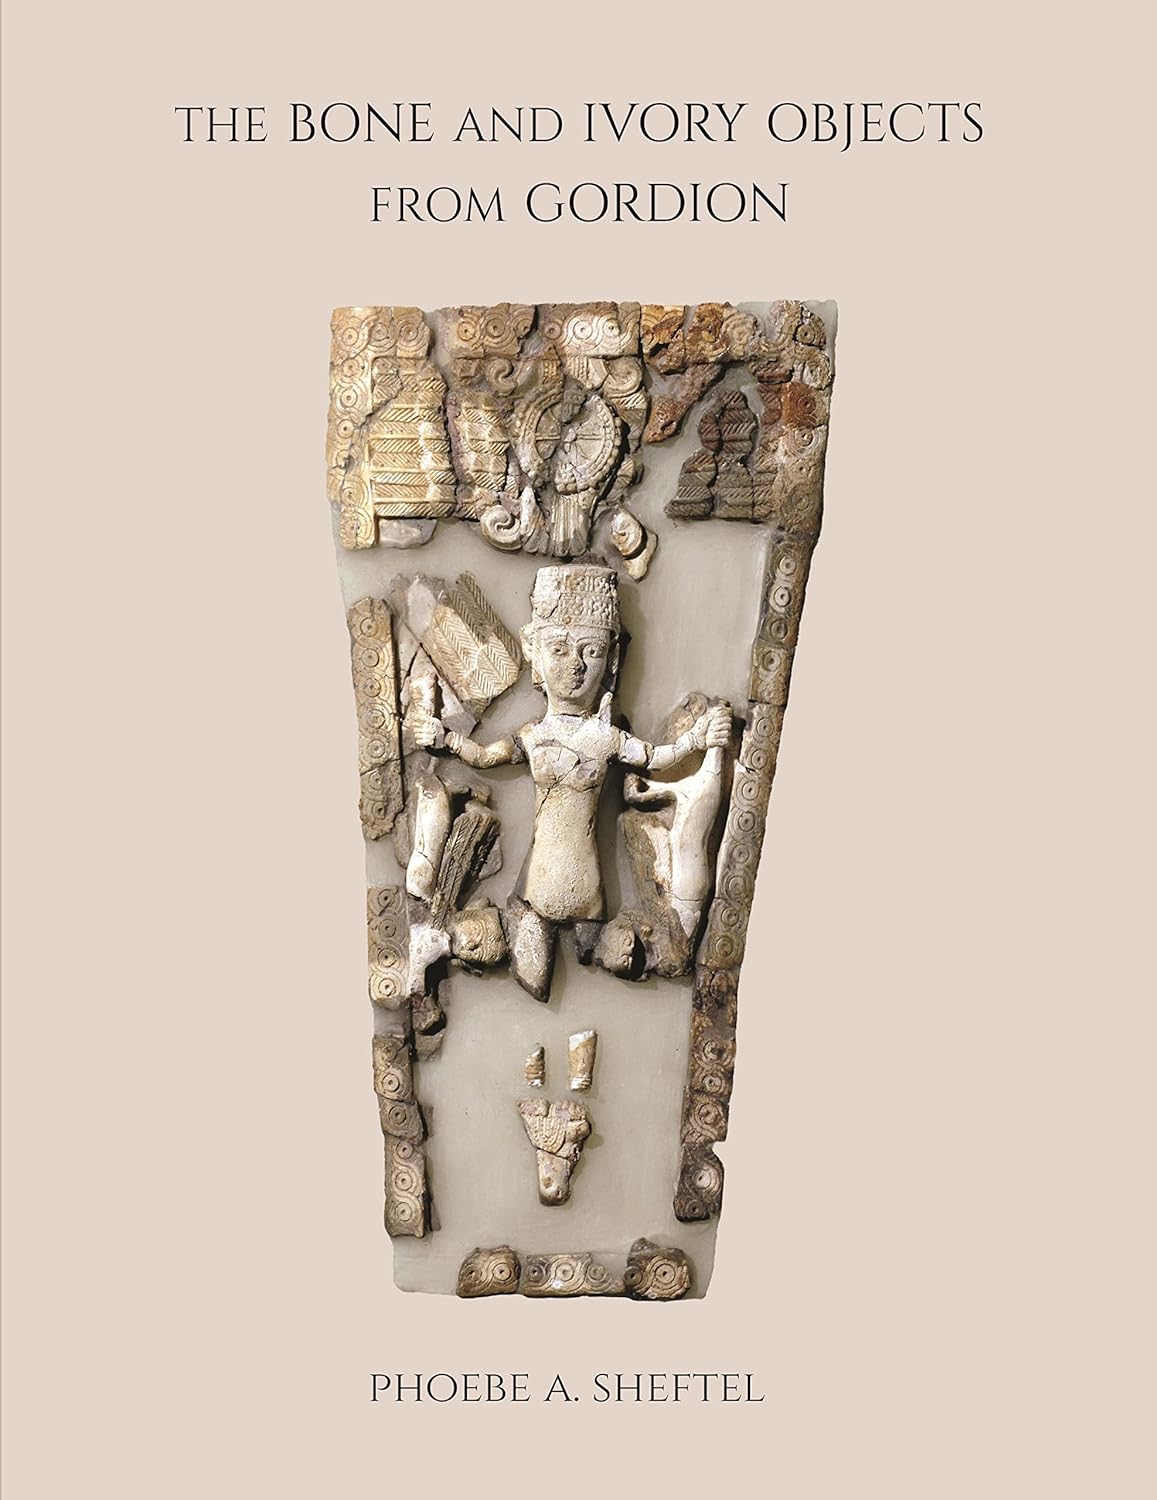 I-Bone and Ivory Objects From Gordion - E-Book - Original PDF